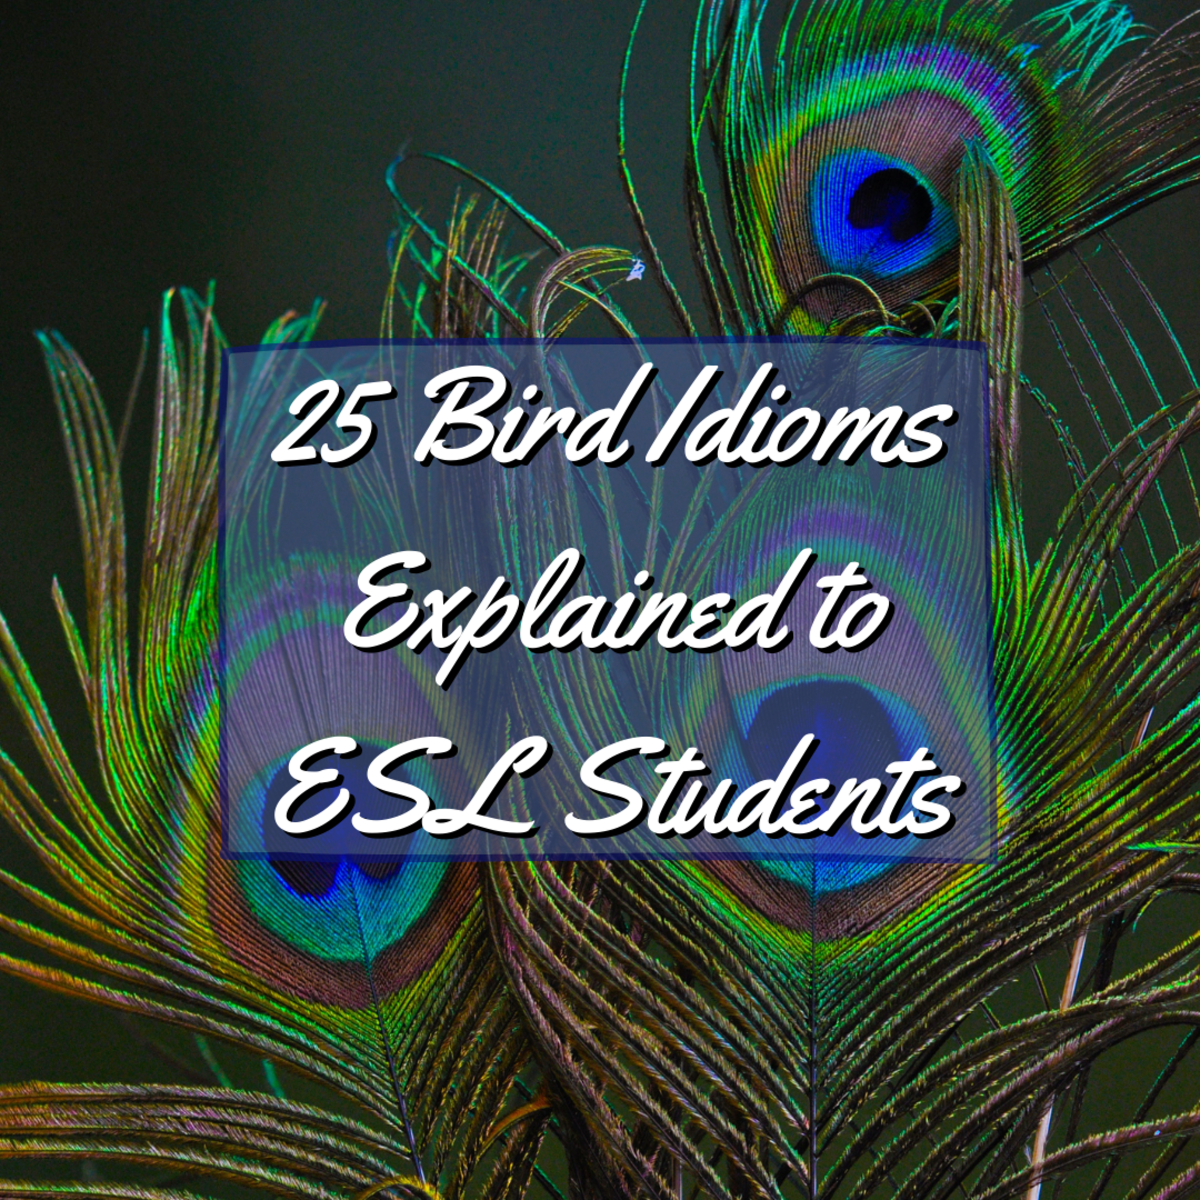 25 Bird Idioms Explained to ESL Students